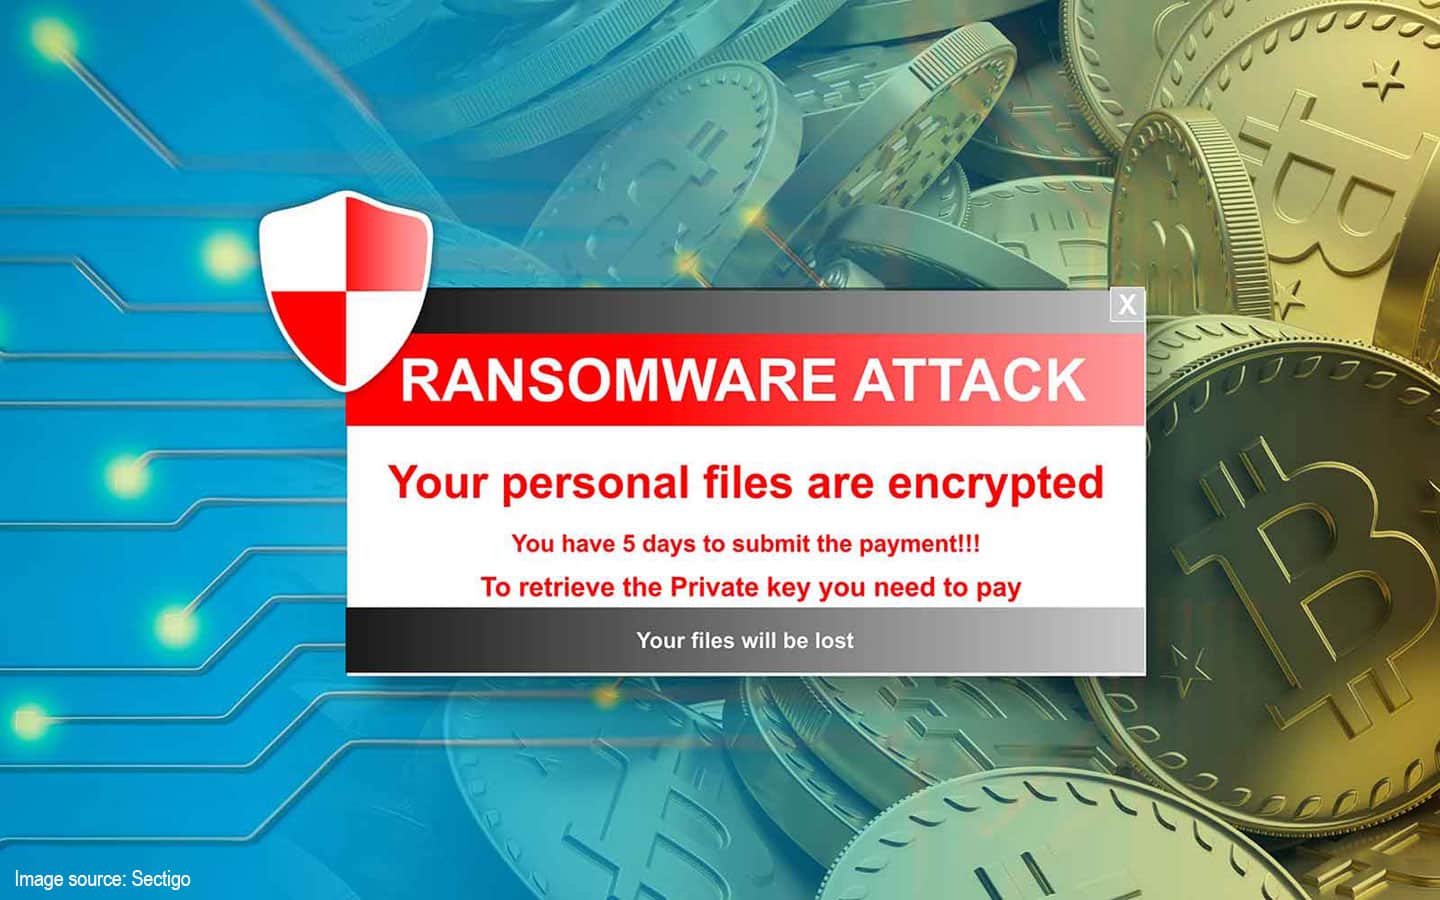 Computermelding met de tekst: "Ransomware attack, your personal files are encrypted."